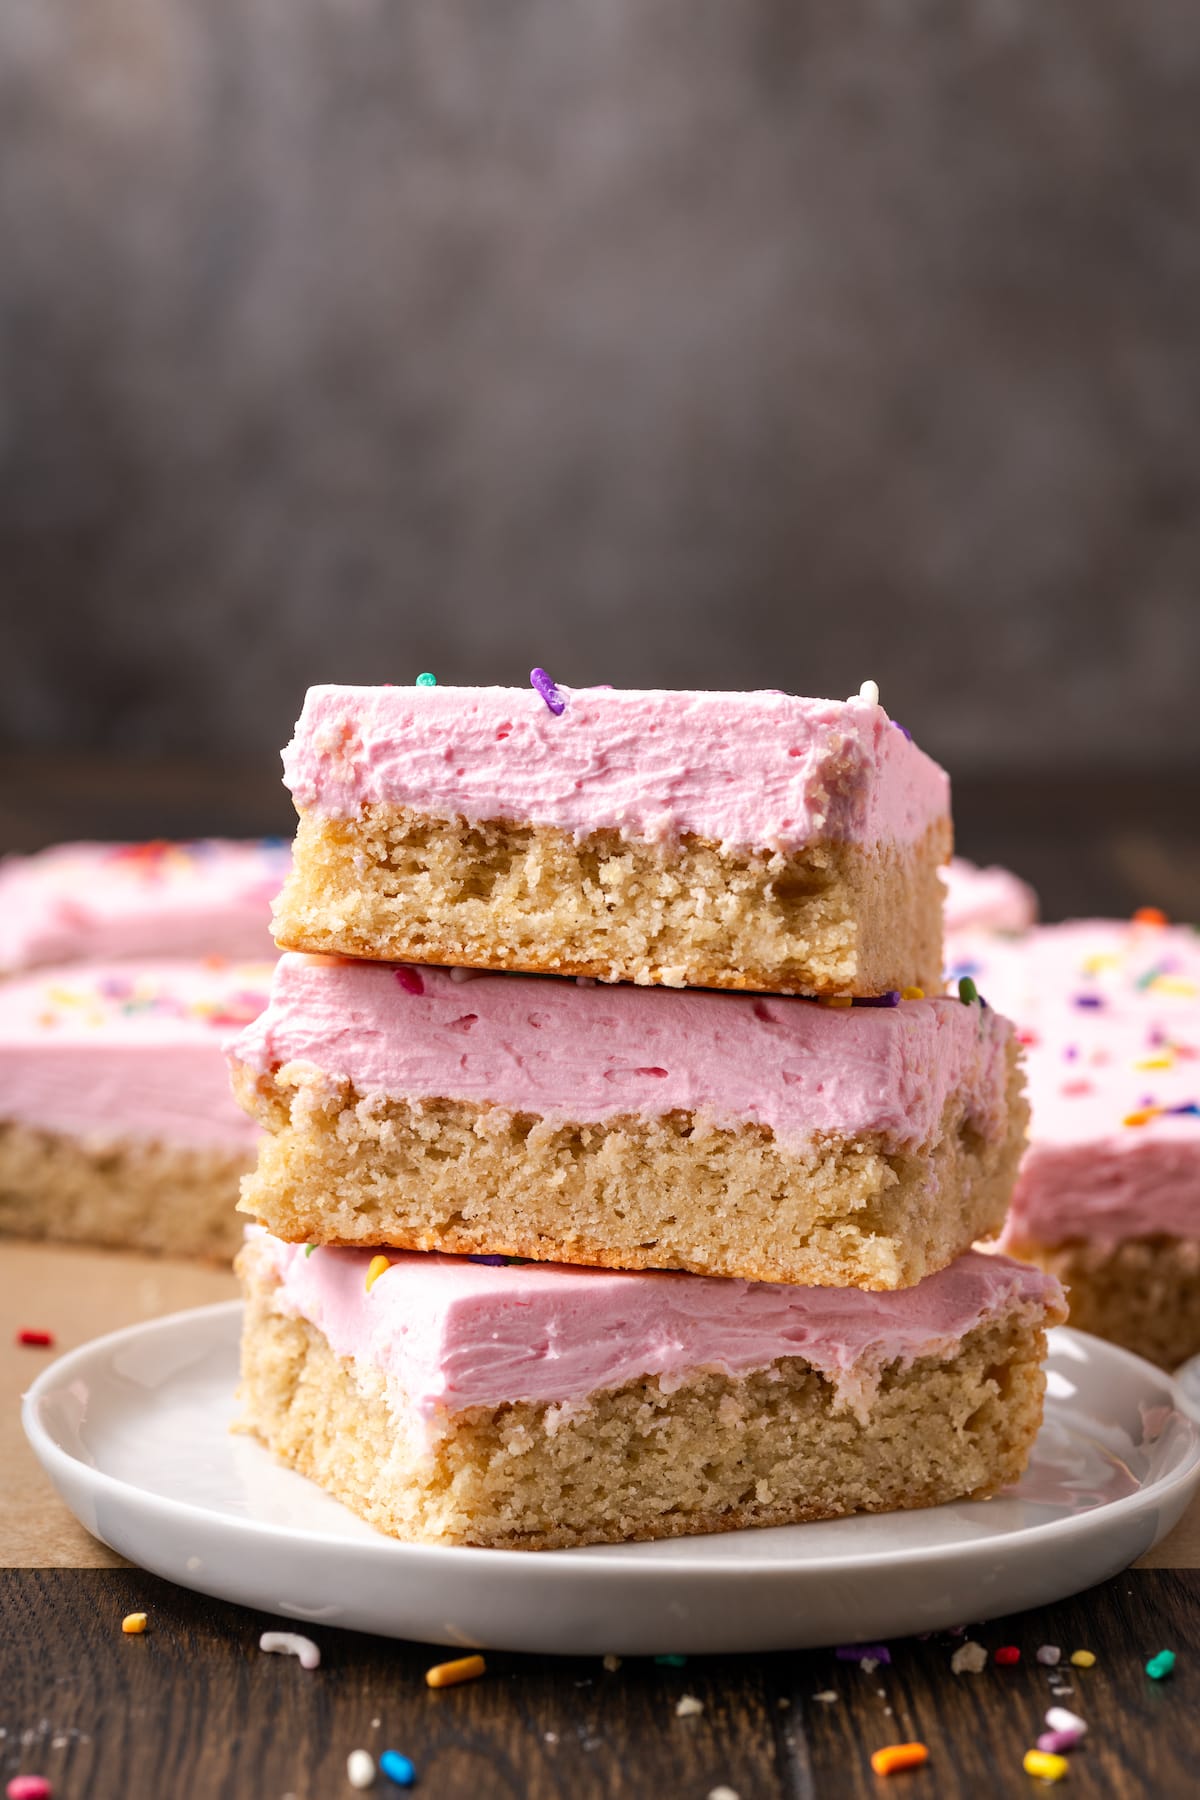 Three frosted sugar cookie bars stacked on a white plate, with more bars in the background.